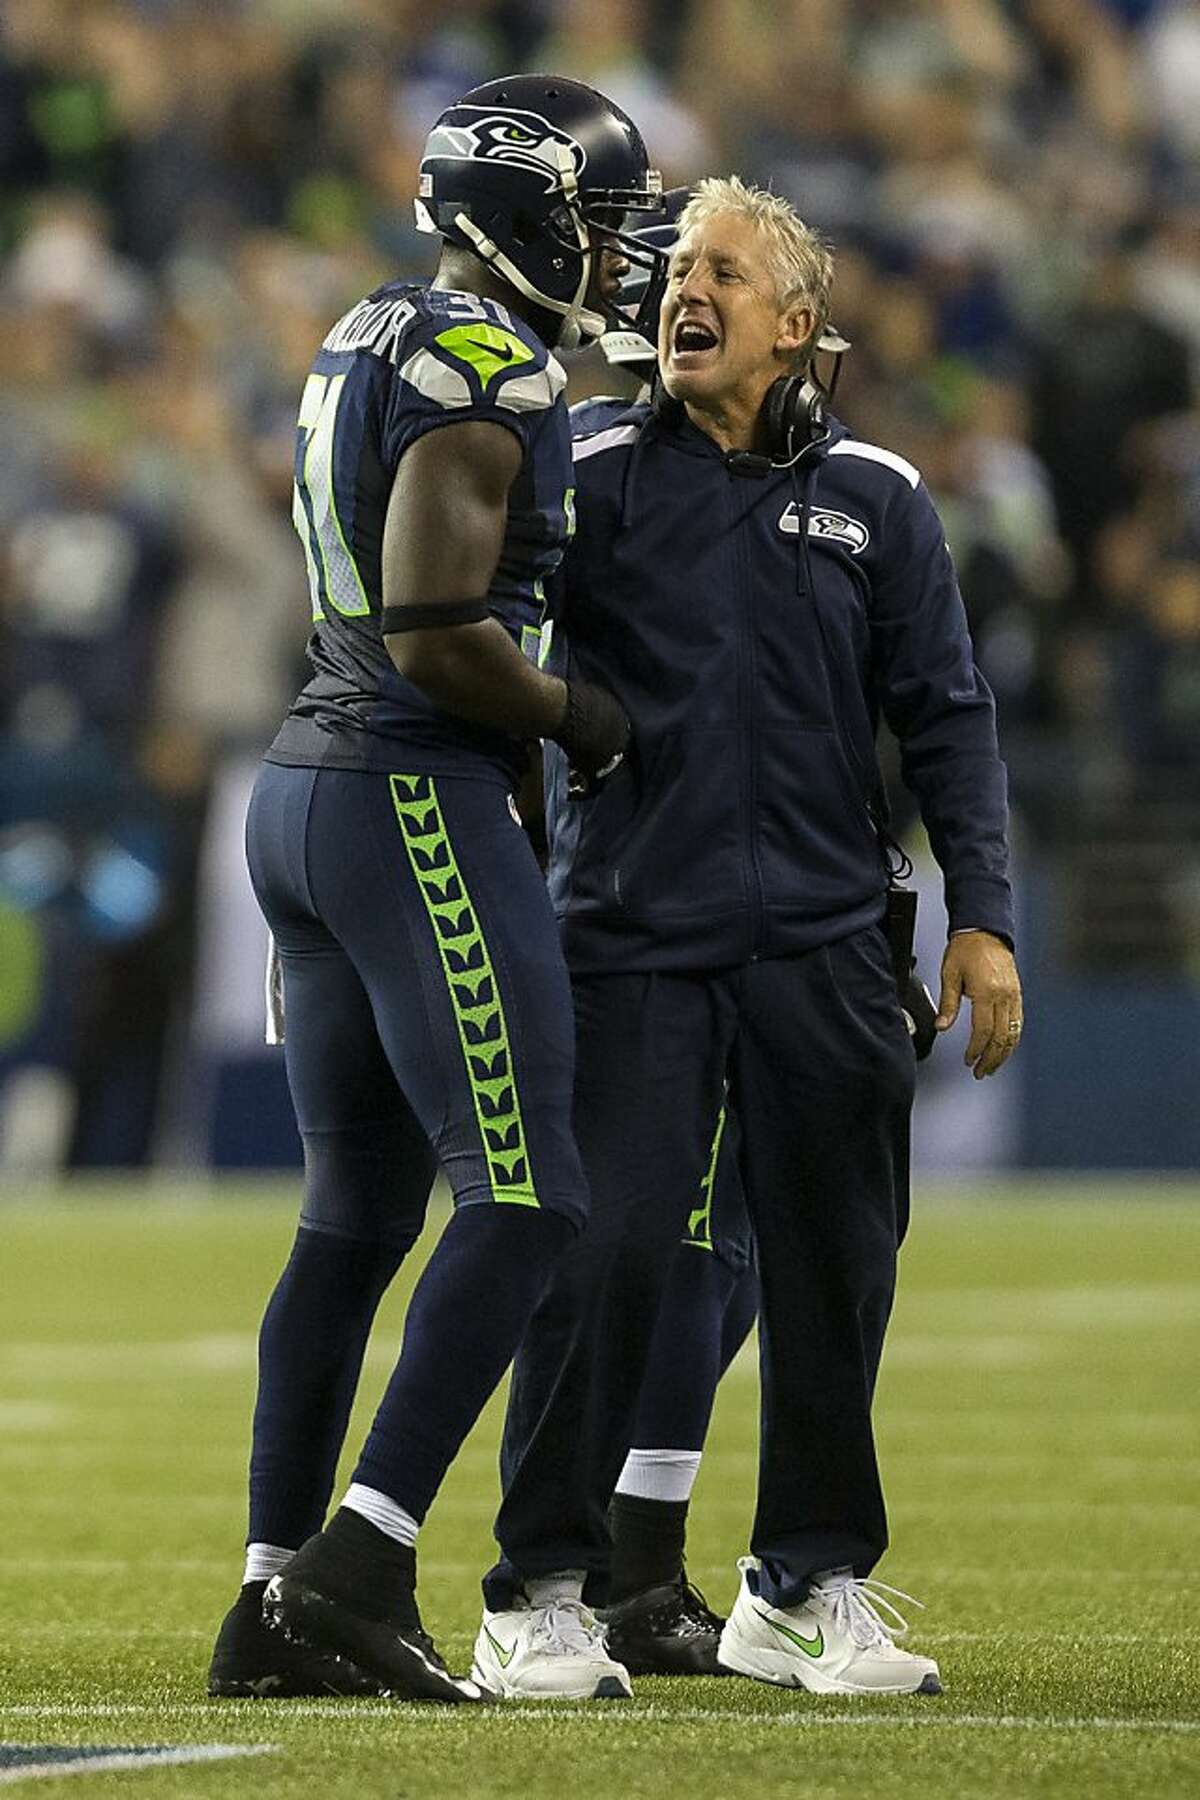 Head coach Pete Carroll, right, welcomes players to the sideline following a play in the Seahawks' favor during the first half of the home opener Sunday, September 15, 2013, at CenturyLink Field in Seattle. The Seahawks led the 49ers 5-0 at the half. (Jordan Stead, seattlepi.com)